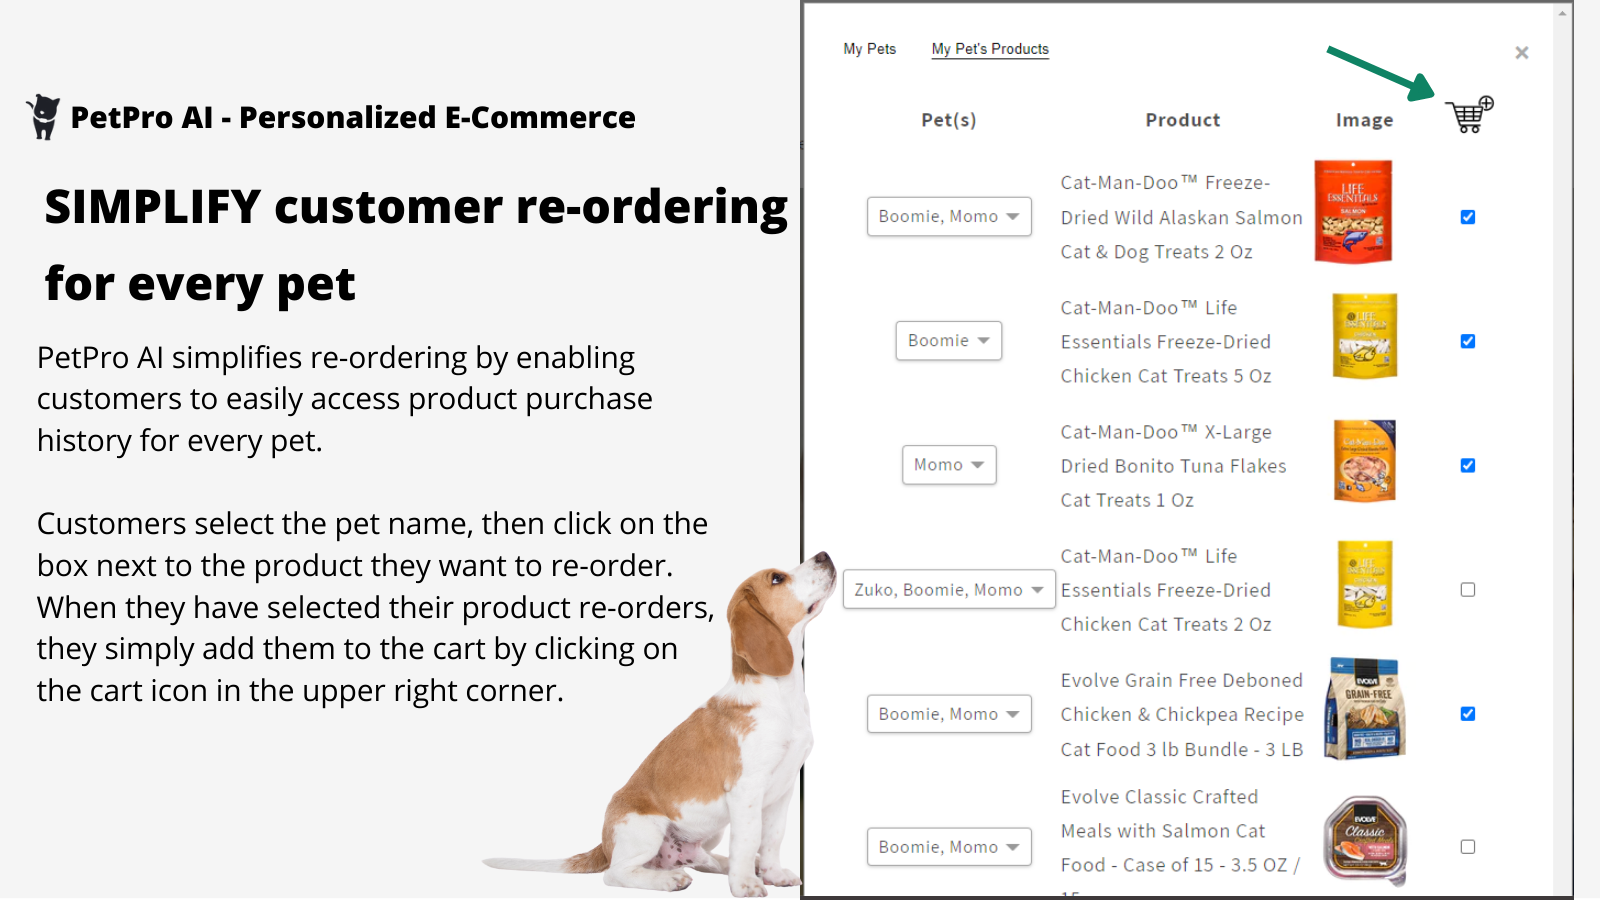 Simplify customer re-ordering for every pet in their home